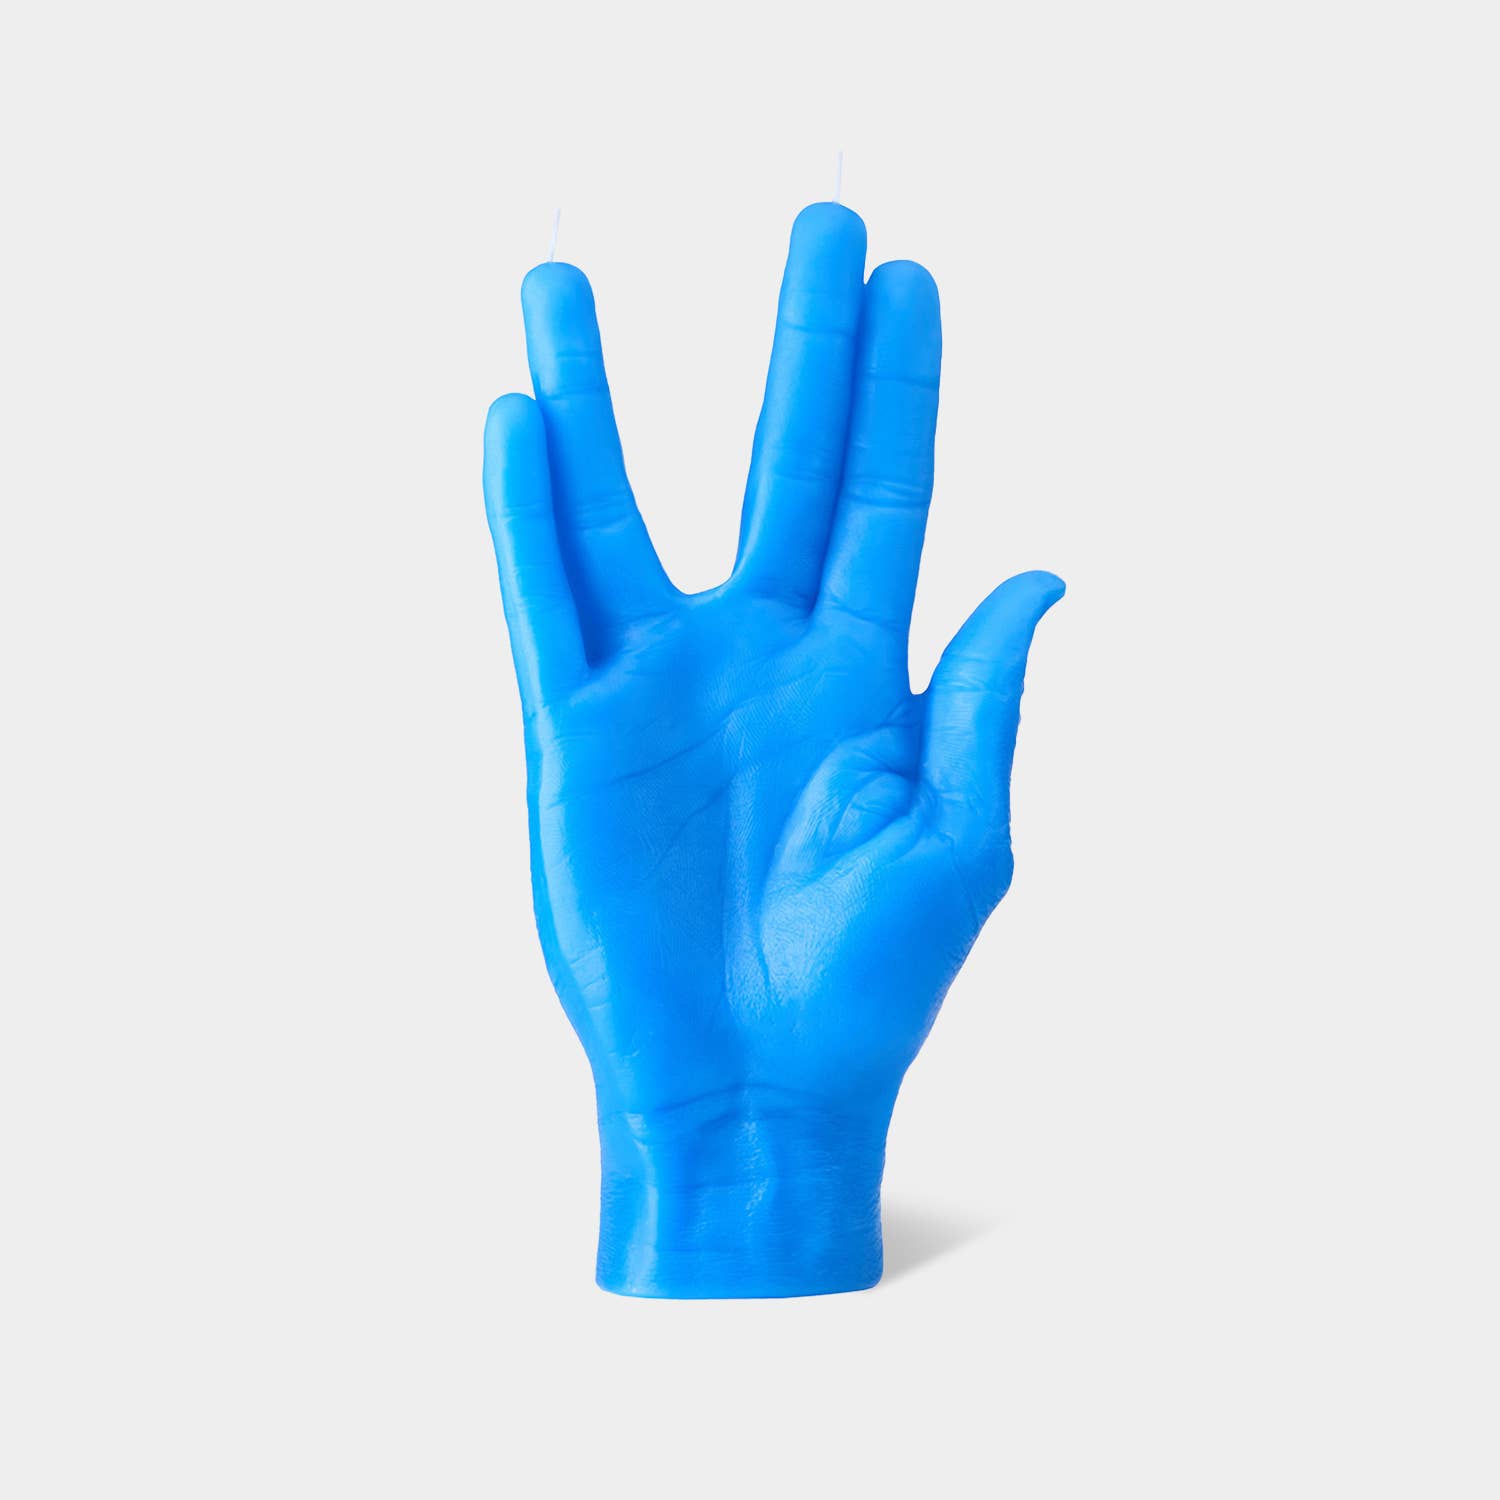 Wholesale CandleHand Hand Gesture Candle - Middle Finger for your